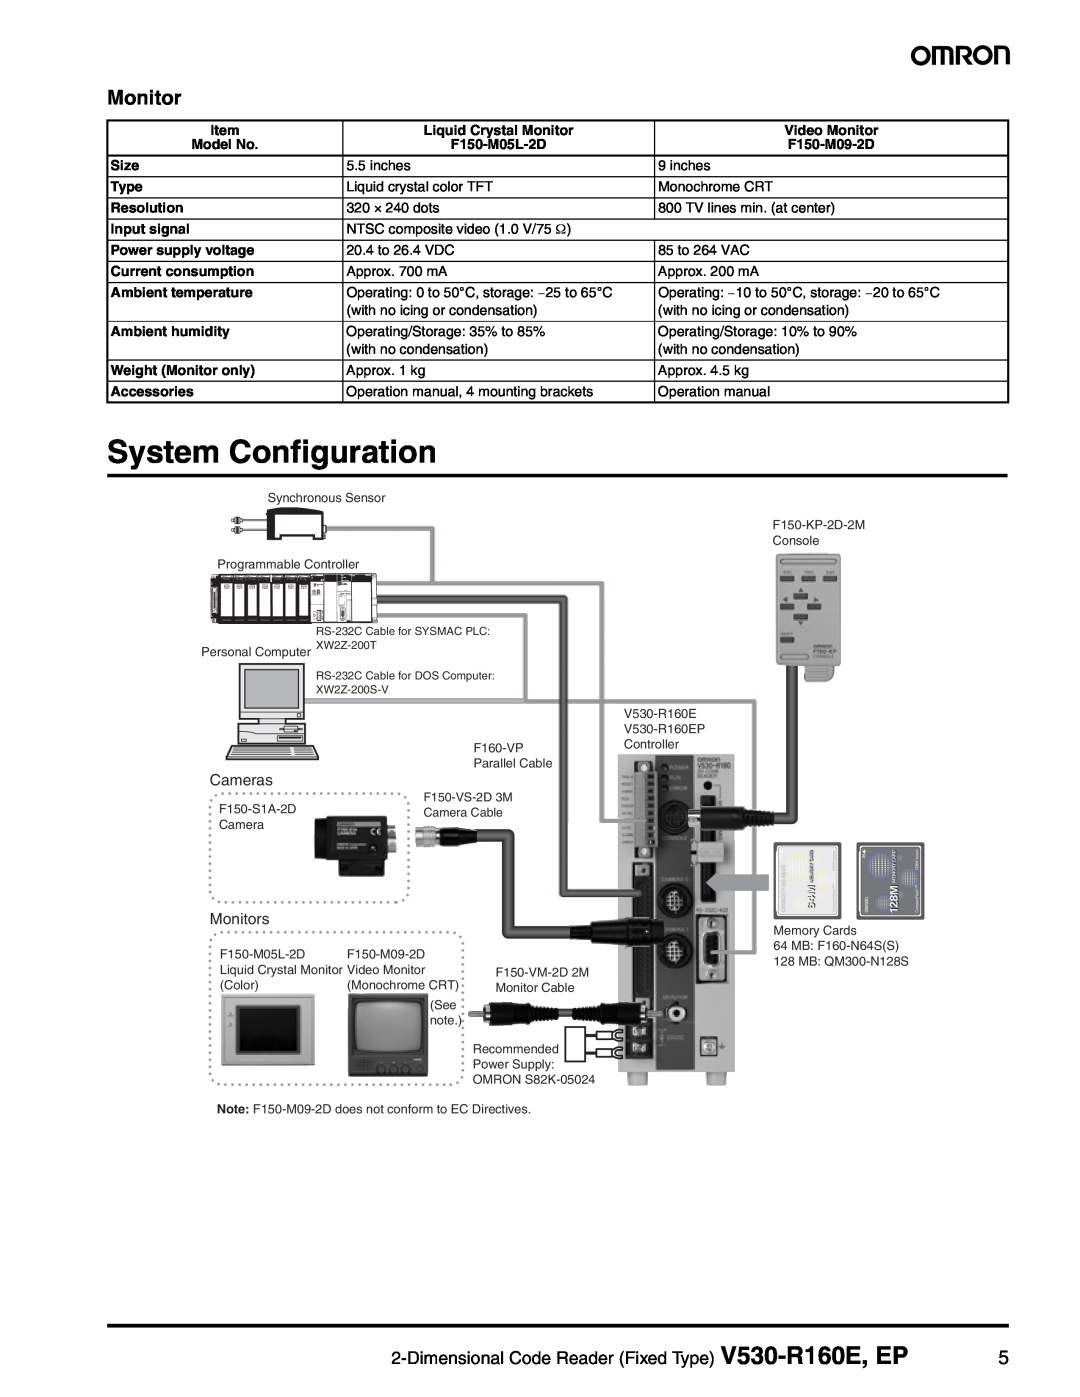 Omron manual System Configuration, Dimensional Code Reader Fixed Type V530-R160E, EP, Cameras, Monitors 